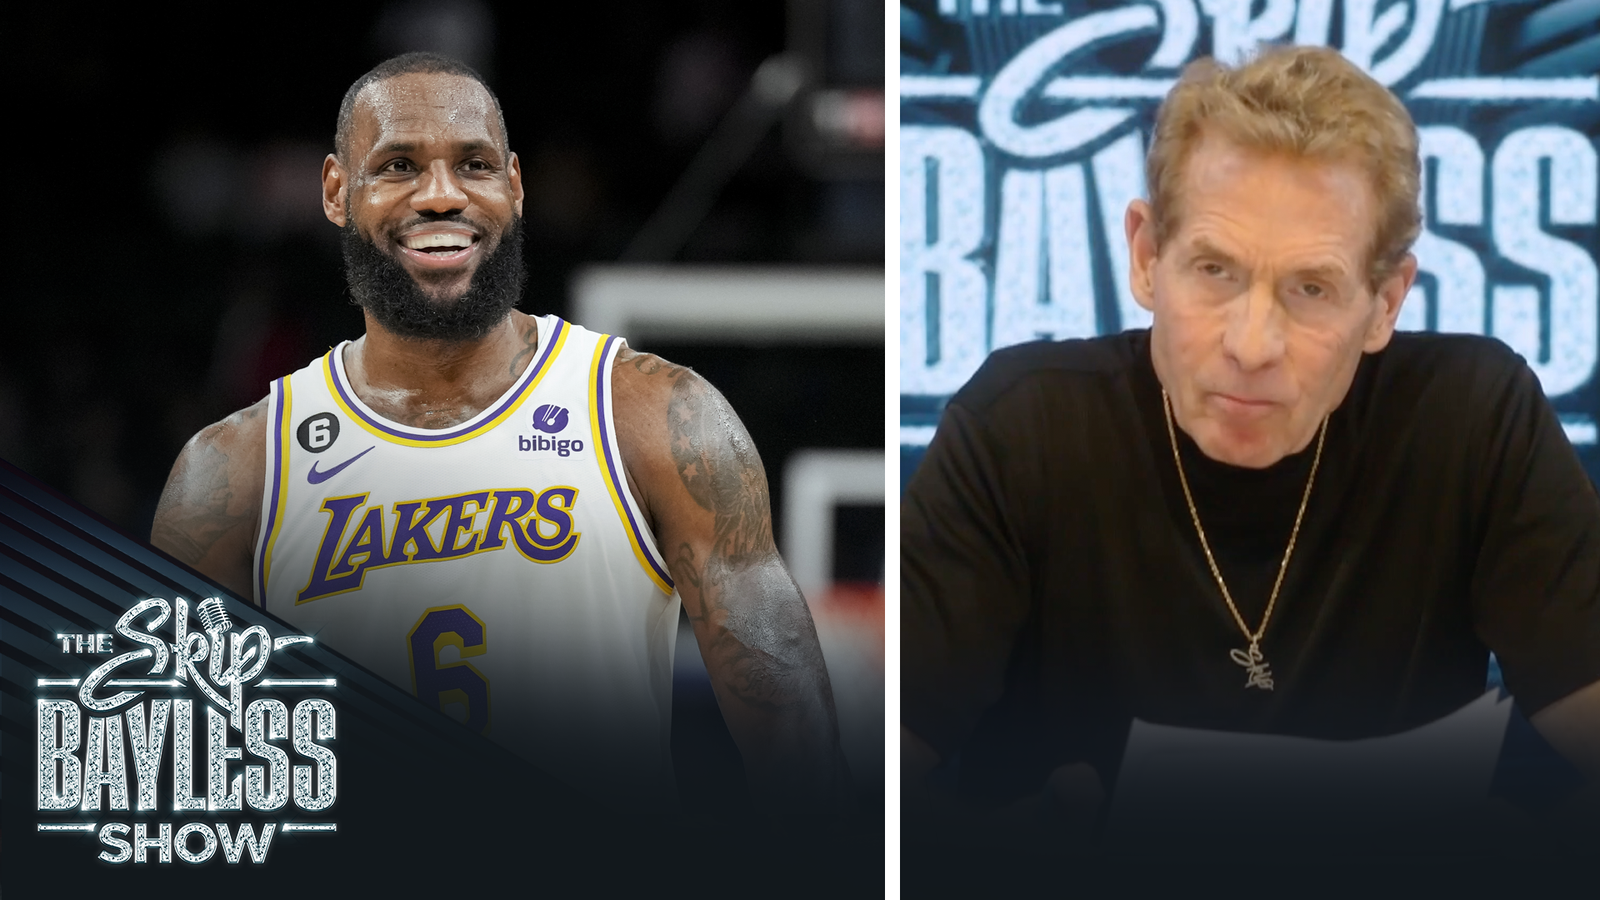 Skip says LeBron's recent scoring streak is "impossibly, all-time great"